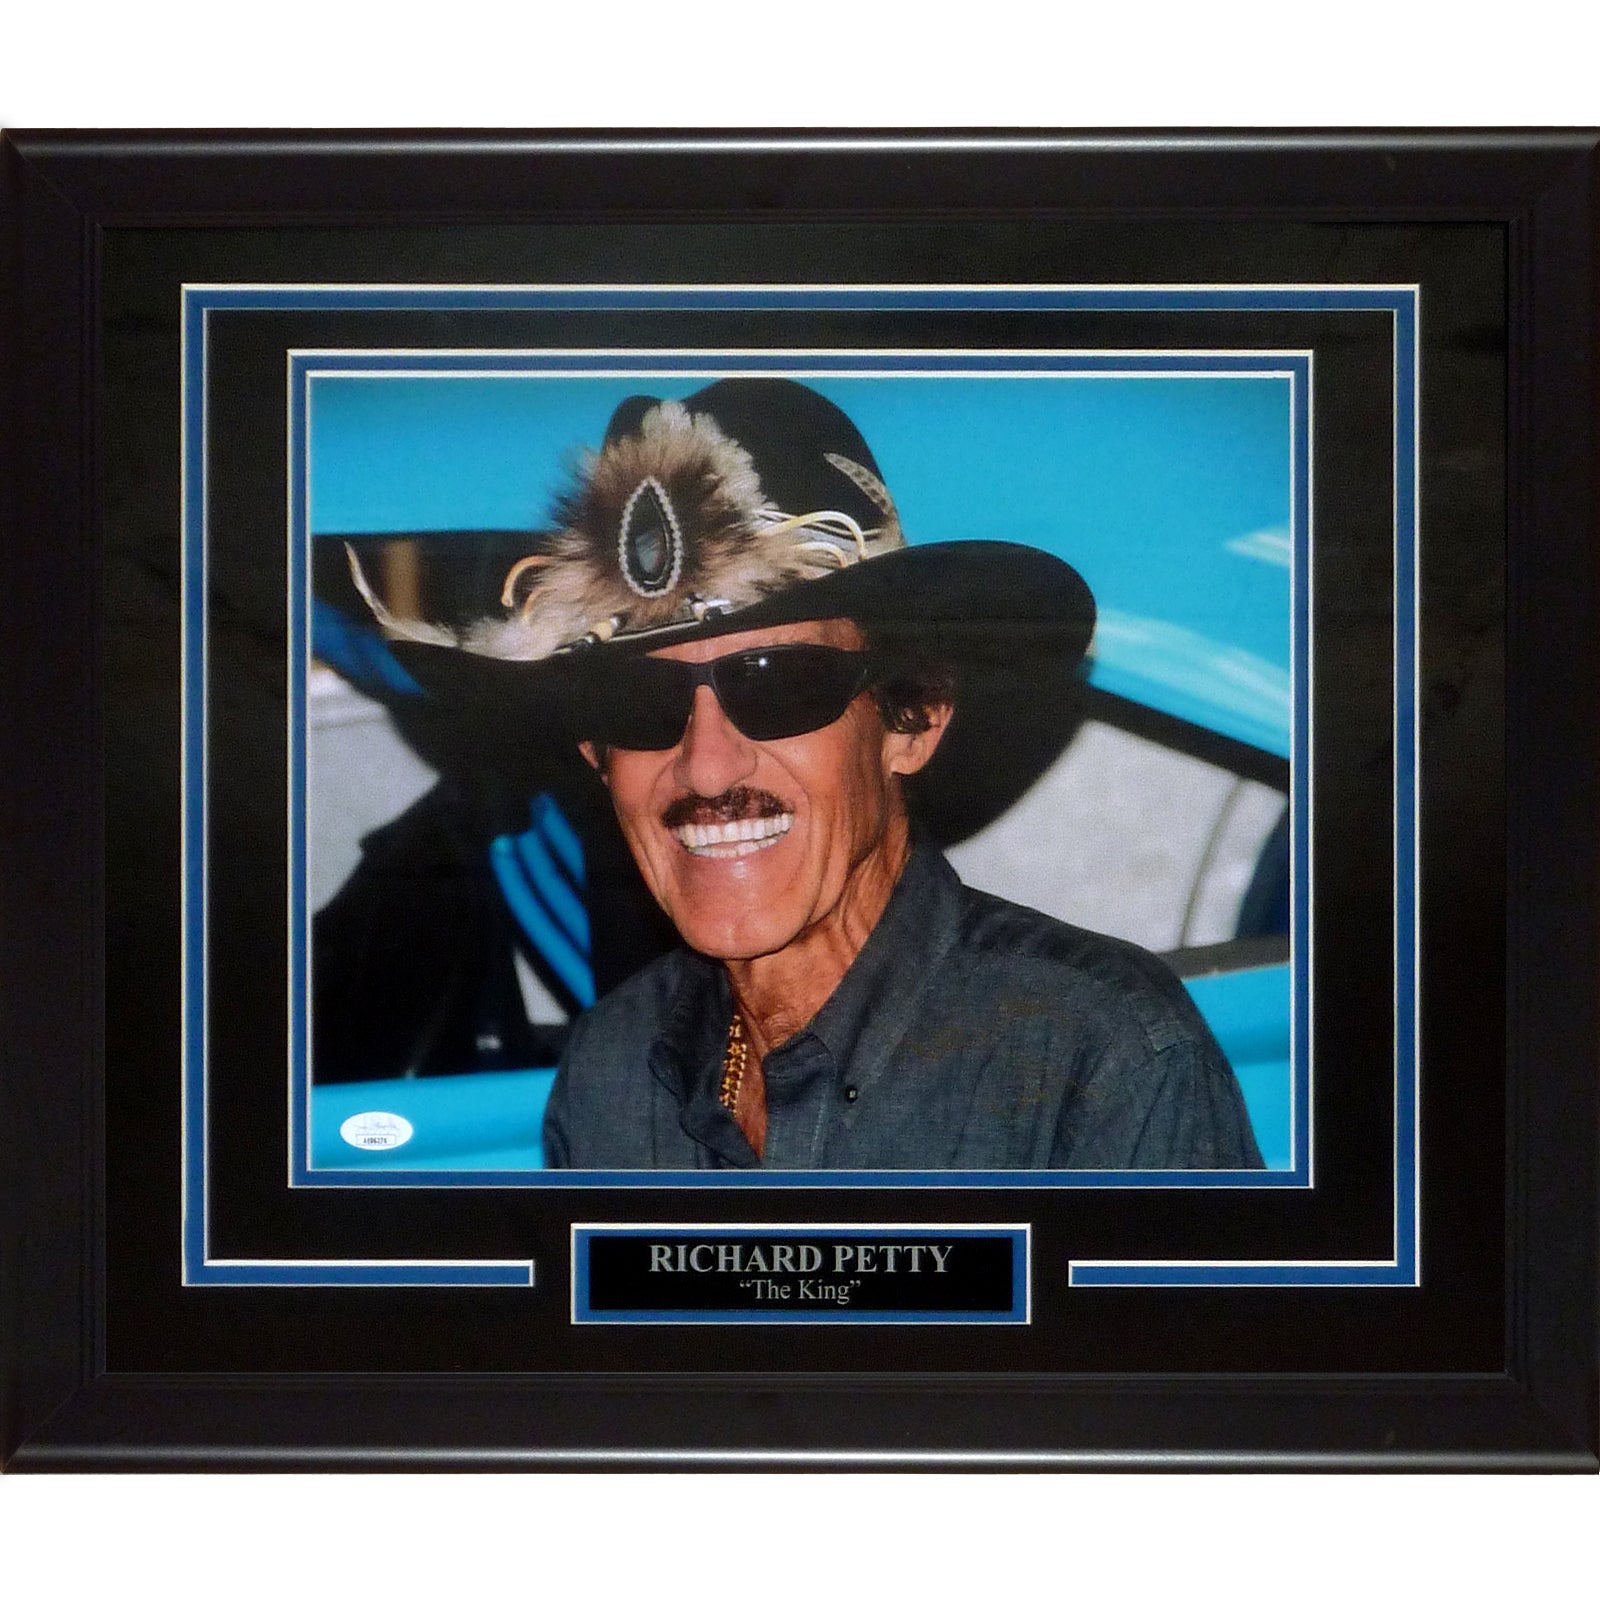 Richard Petty Autographed Nascar Deluxe Framed 11x14 Photo